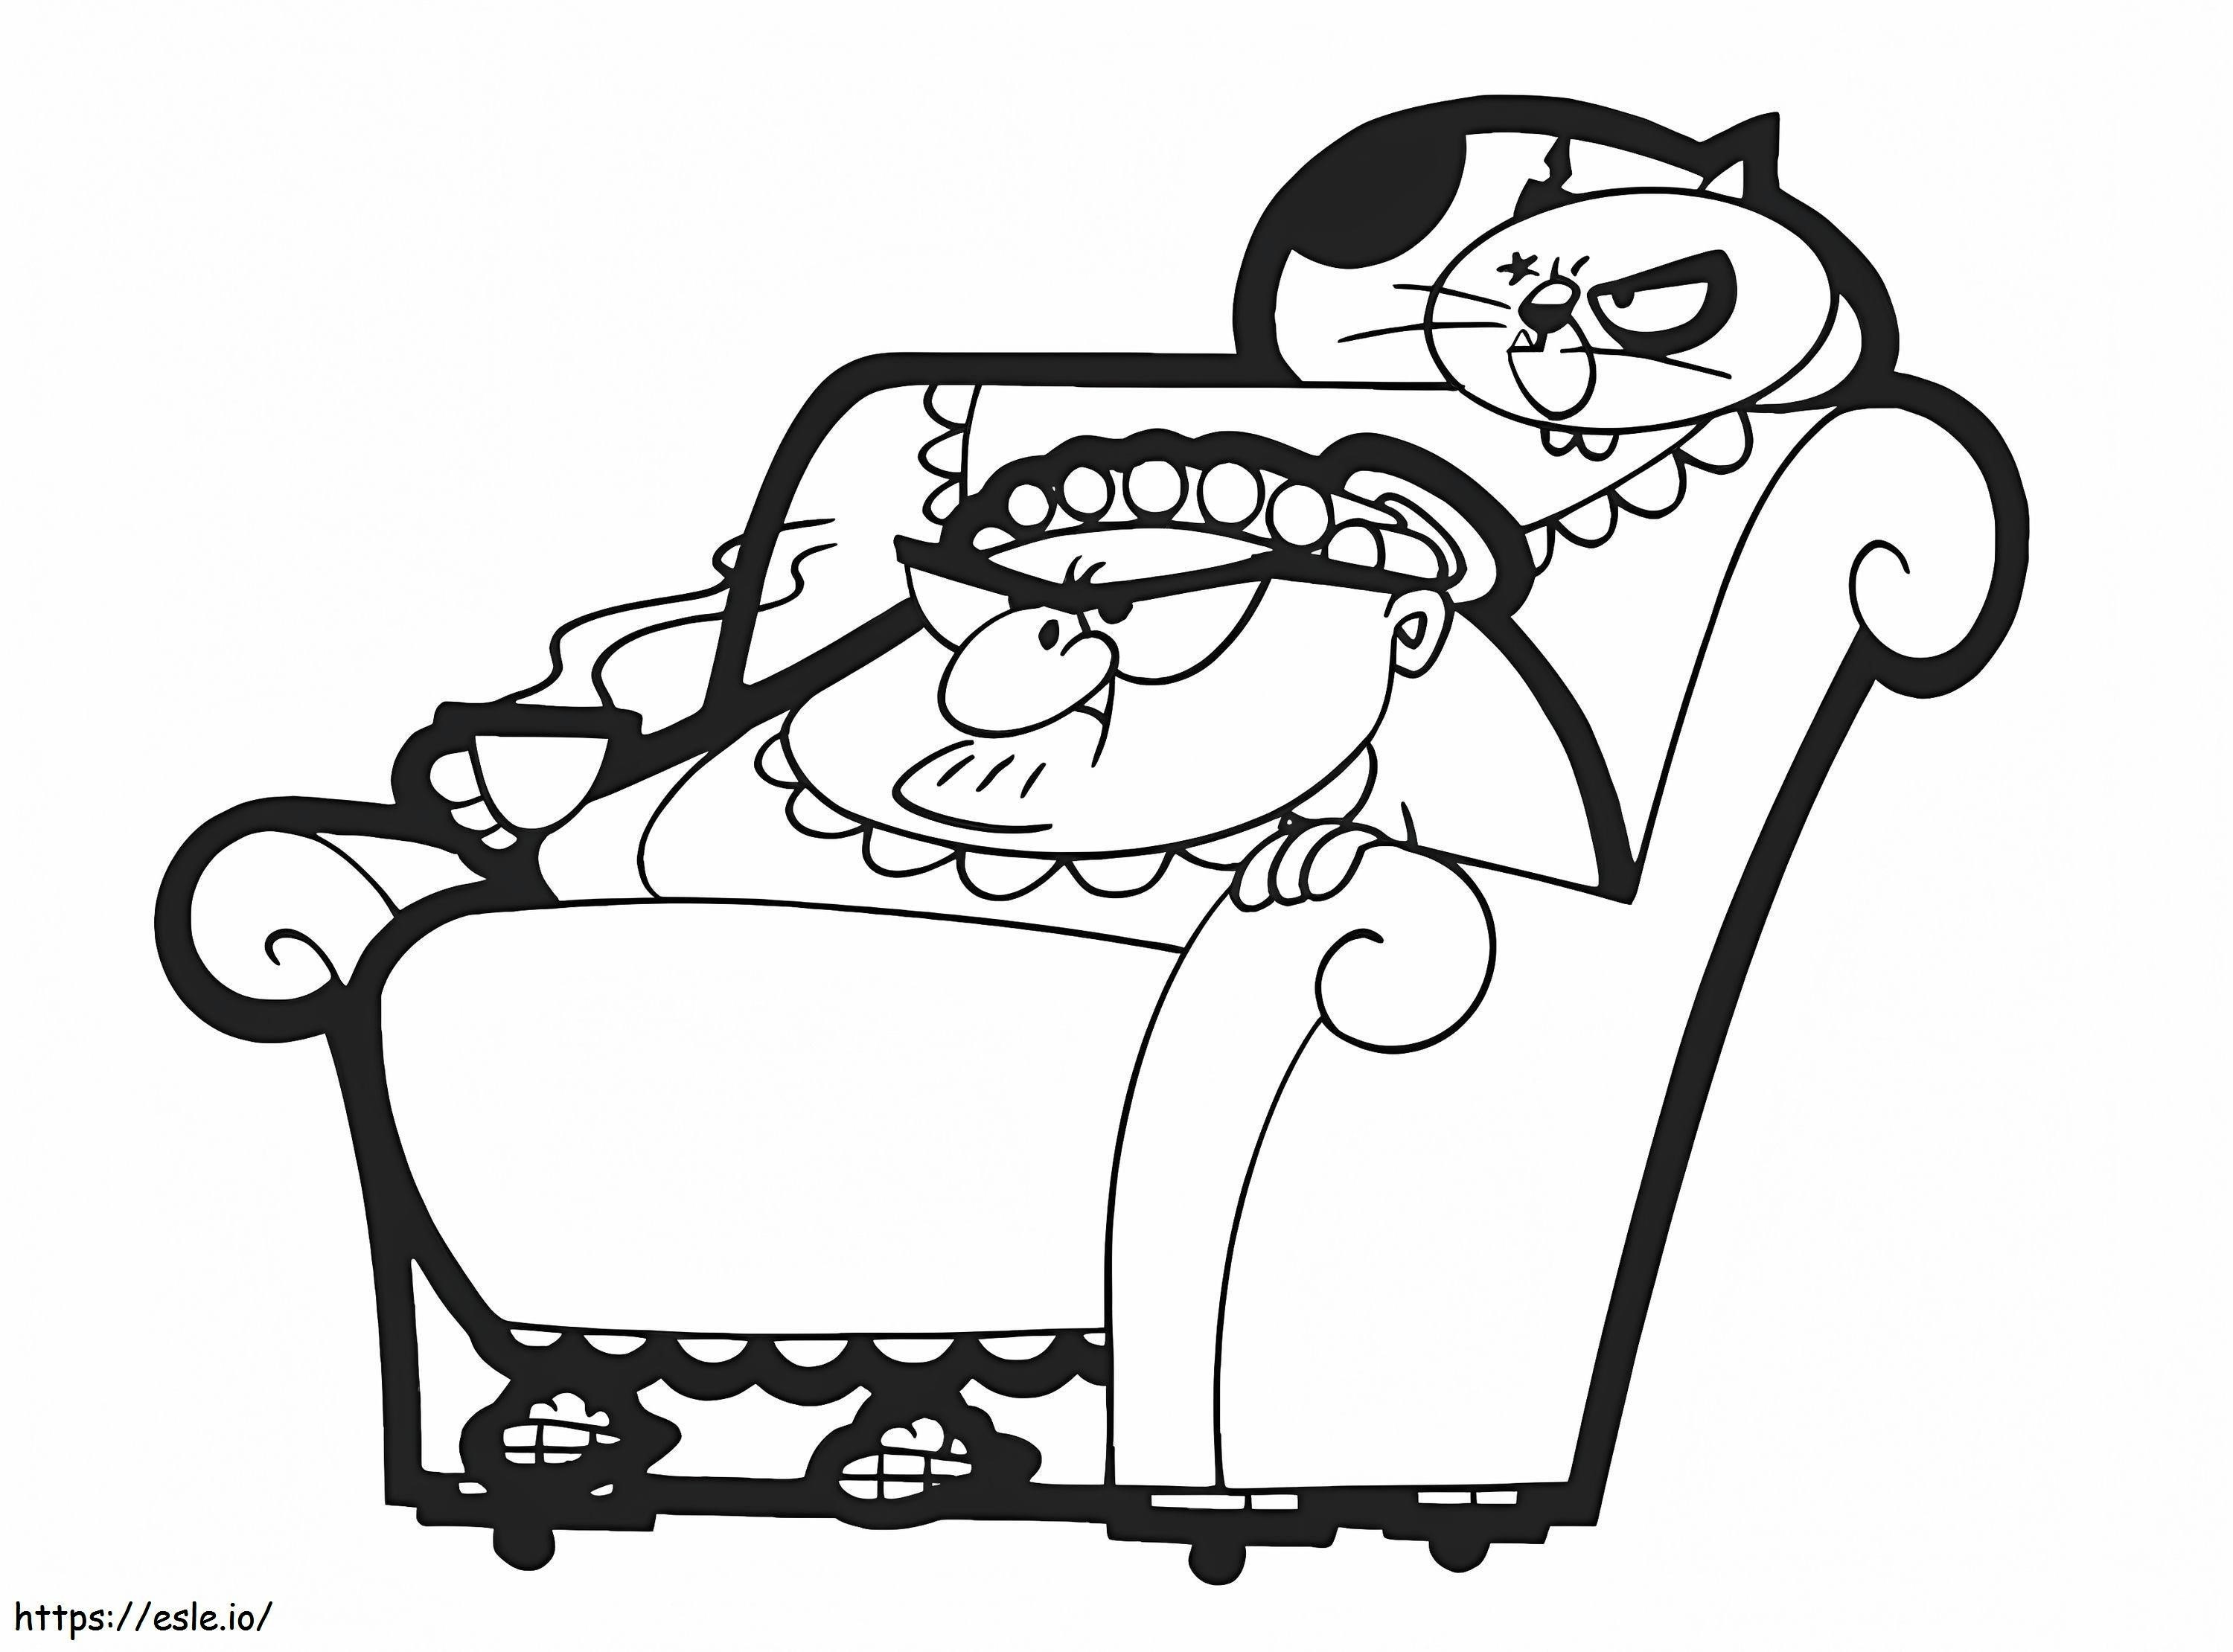 1531706421_Mrs Wicket And Scraper A4 coloring page